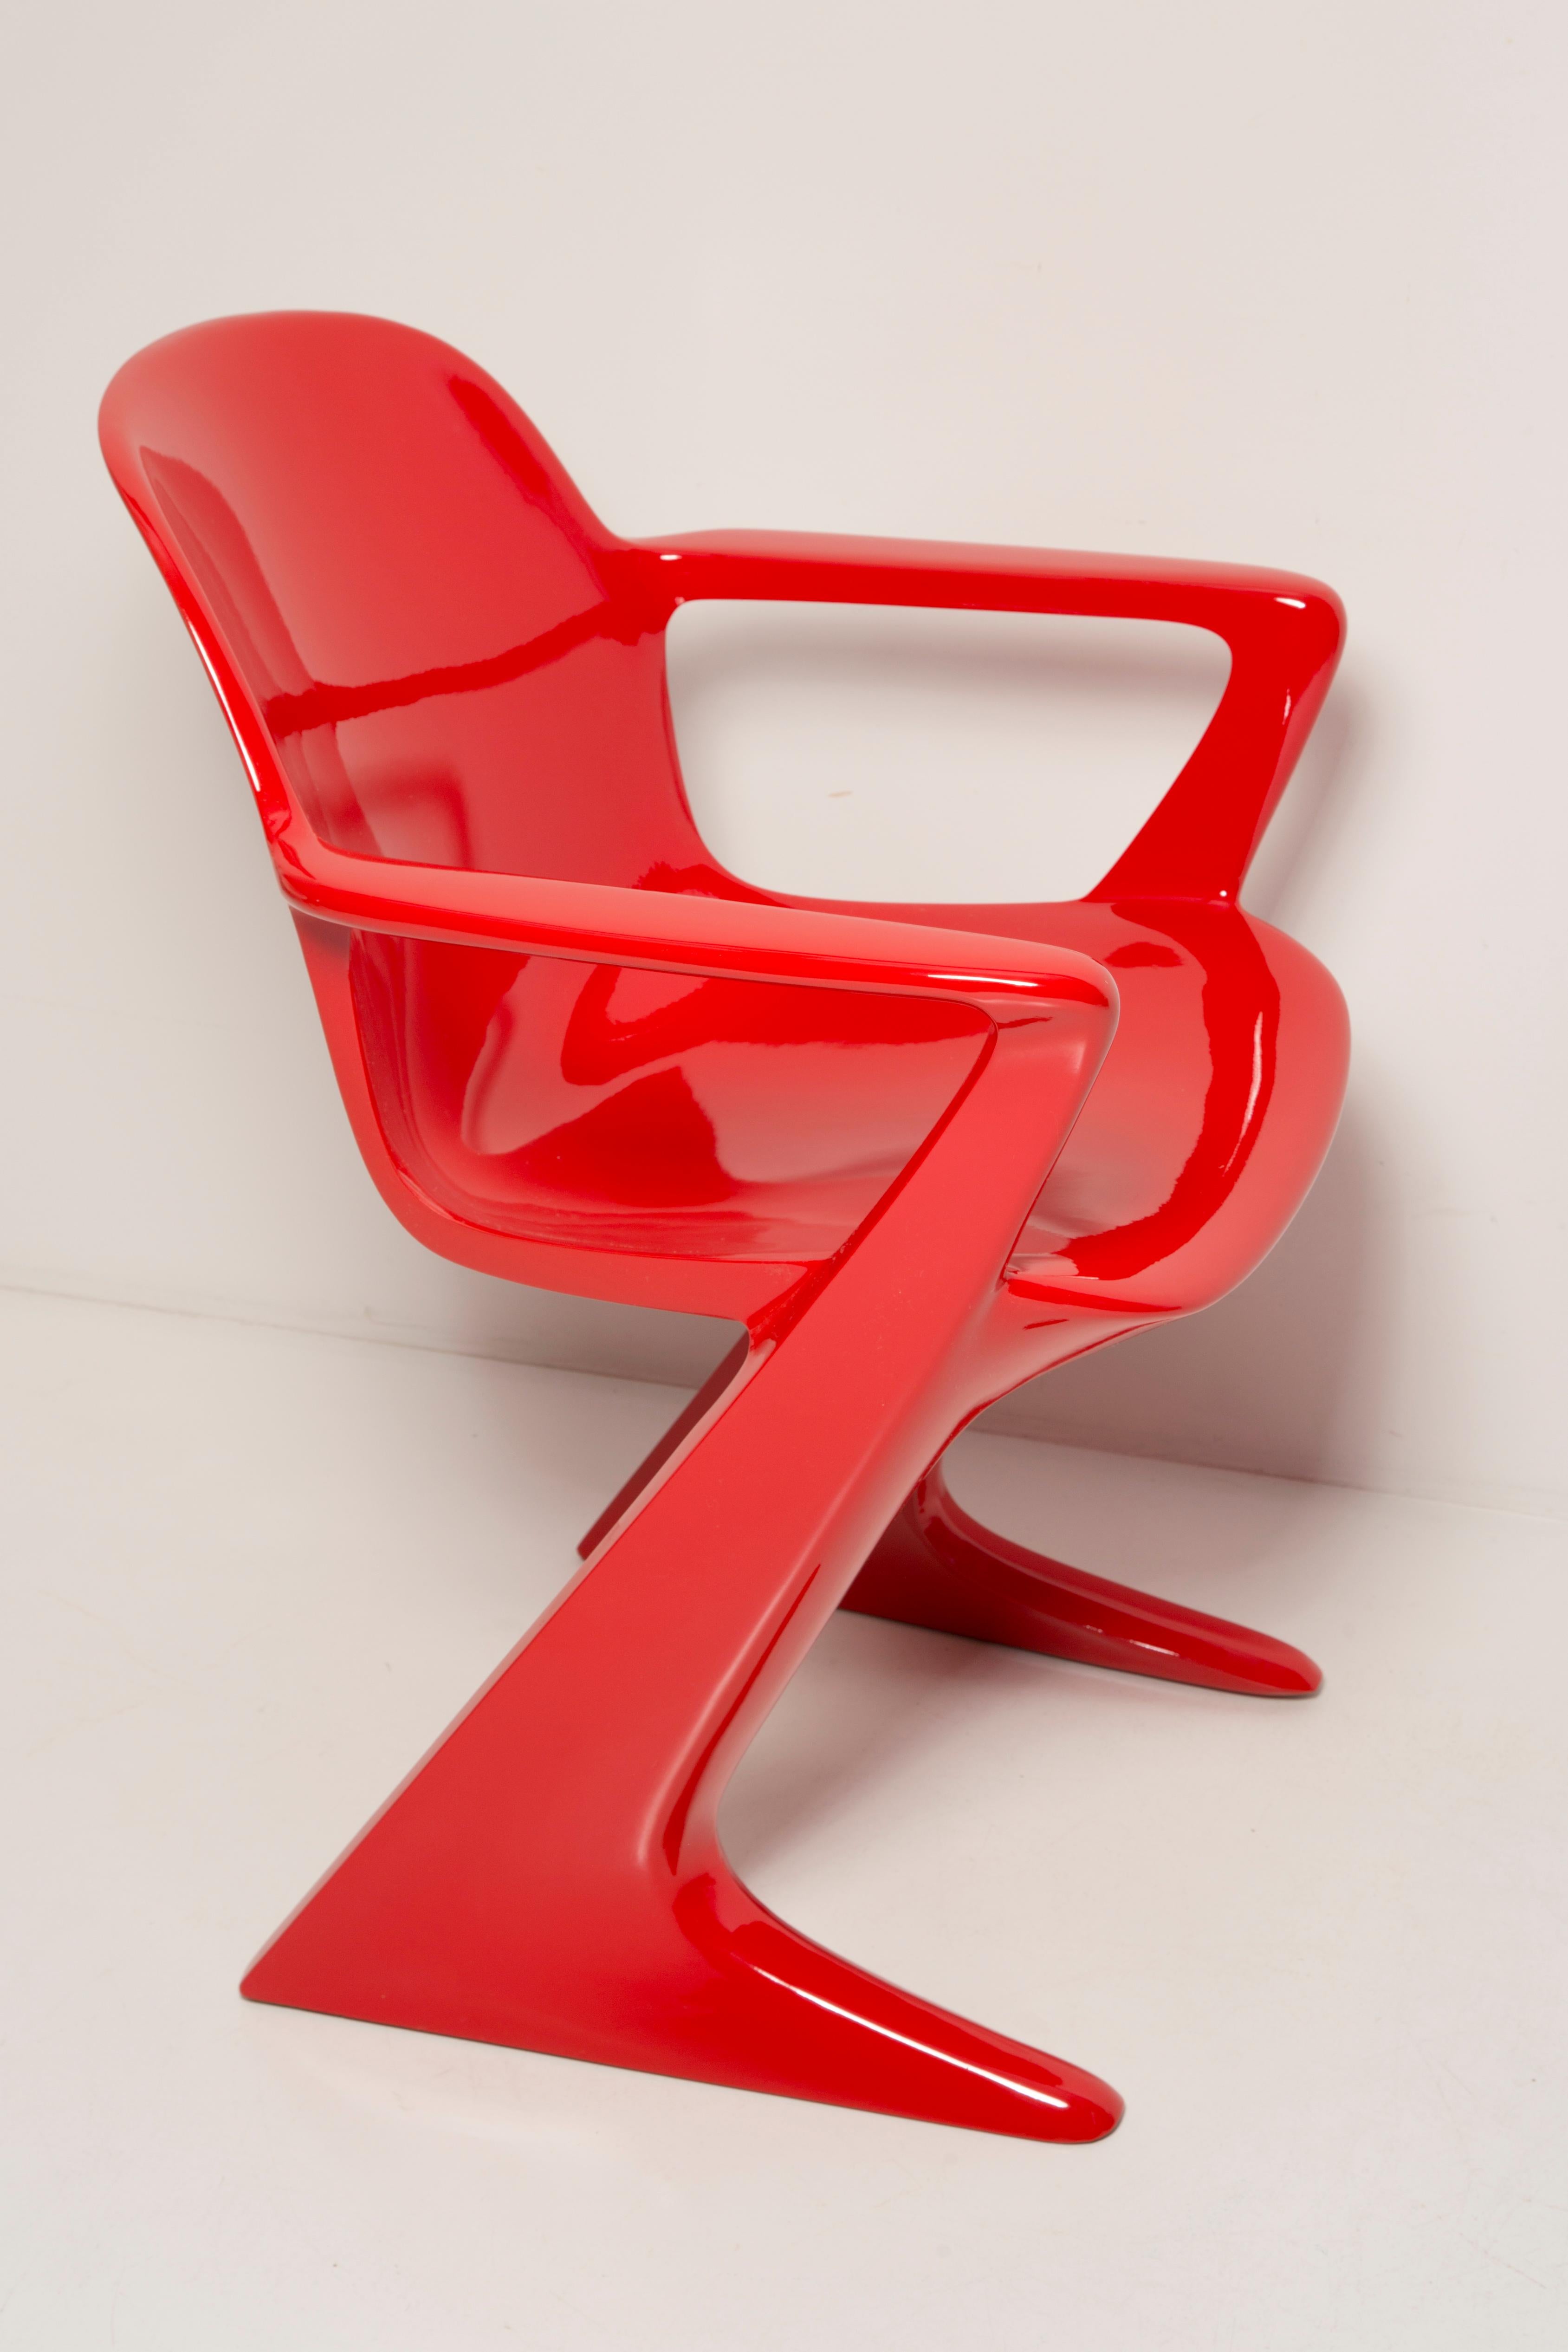 Lacquered Set of Six Midcentury Signal Red Kangaroo Chairs, Ernst Moeckl, Germany, 1968 For Sale